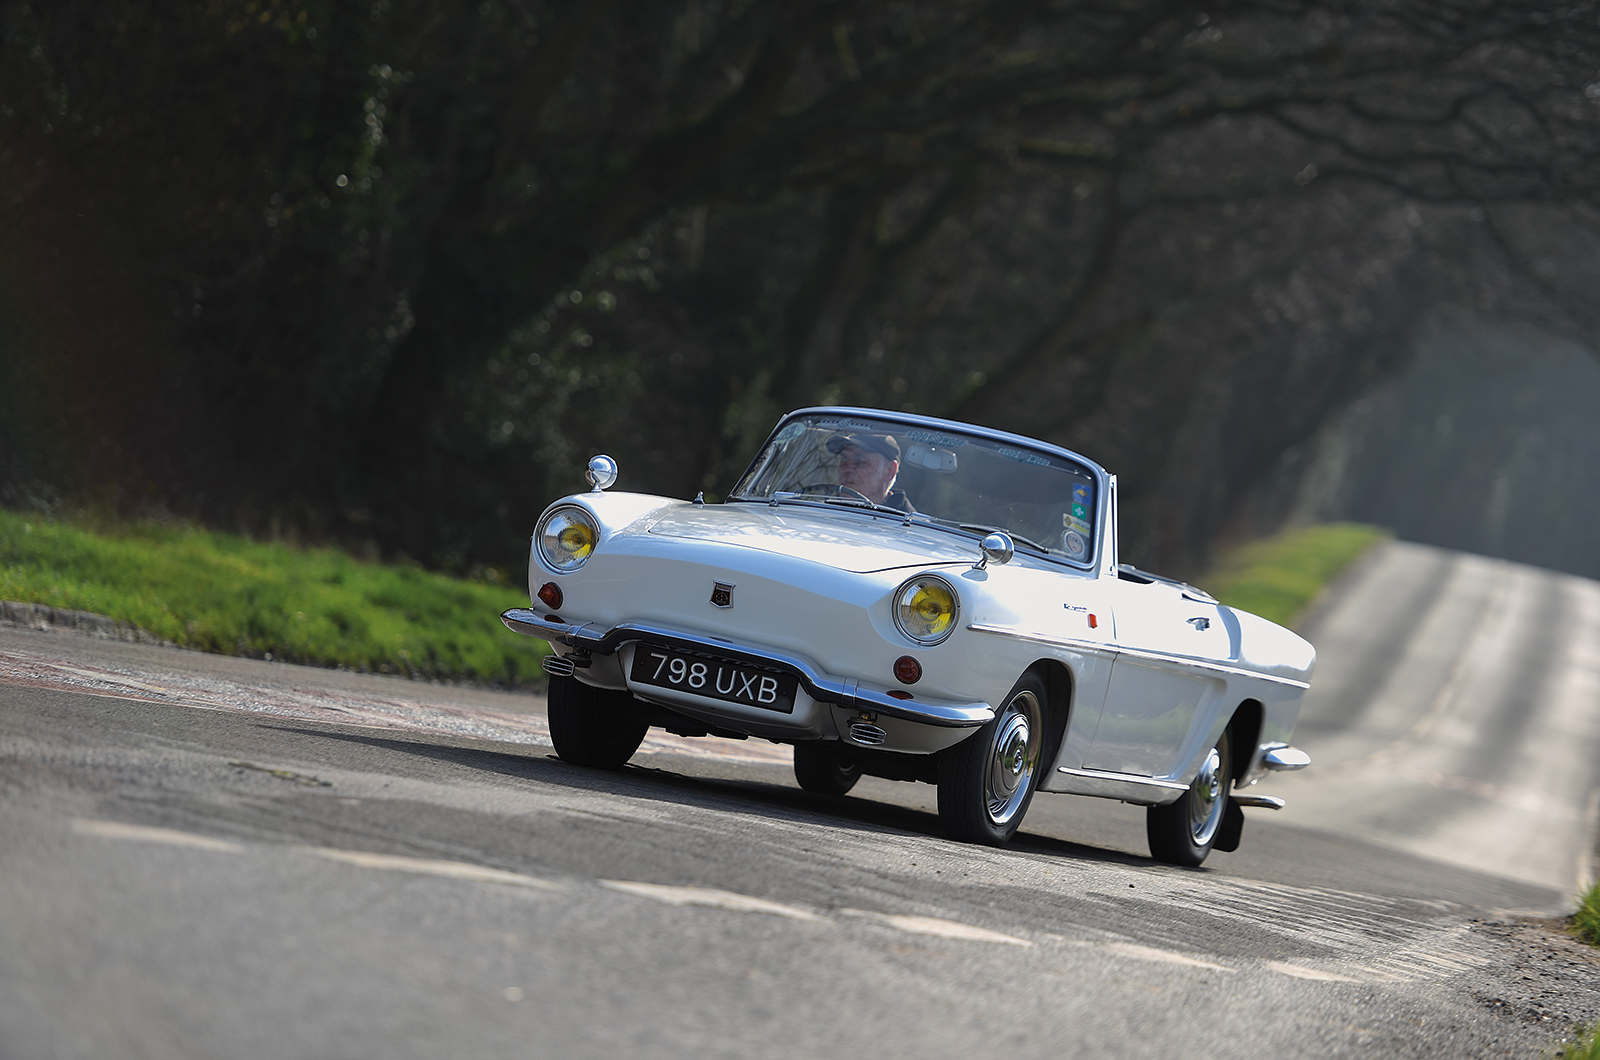 Classic & Sports Car – Chic to chic: Volkswagen Karmann Ghia vs Renault Floride